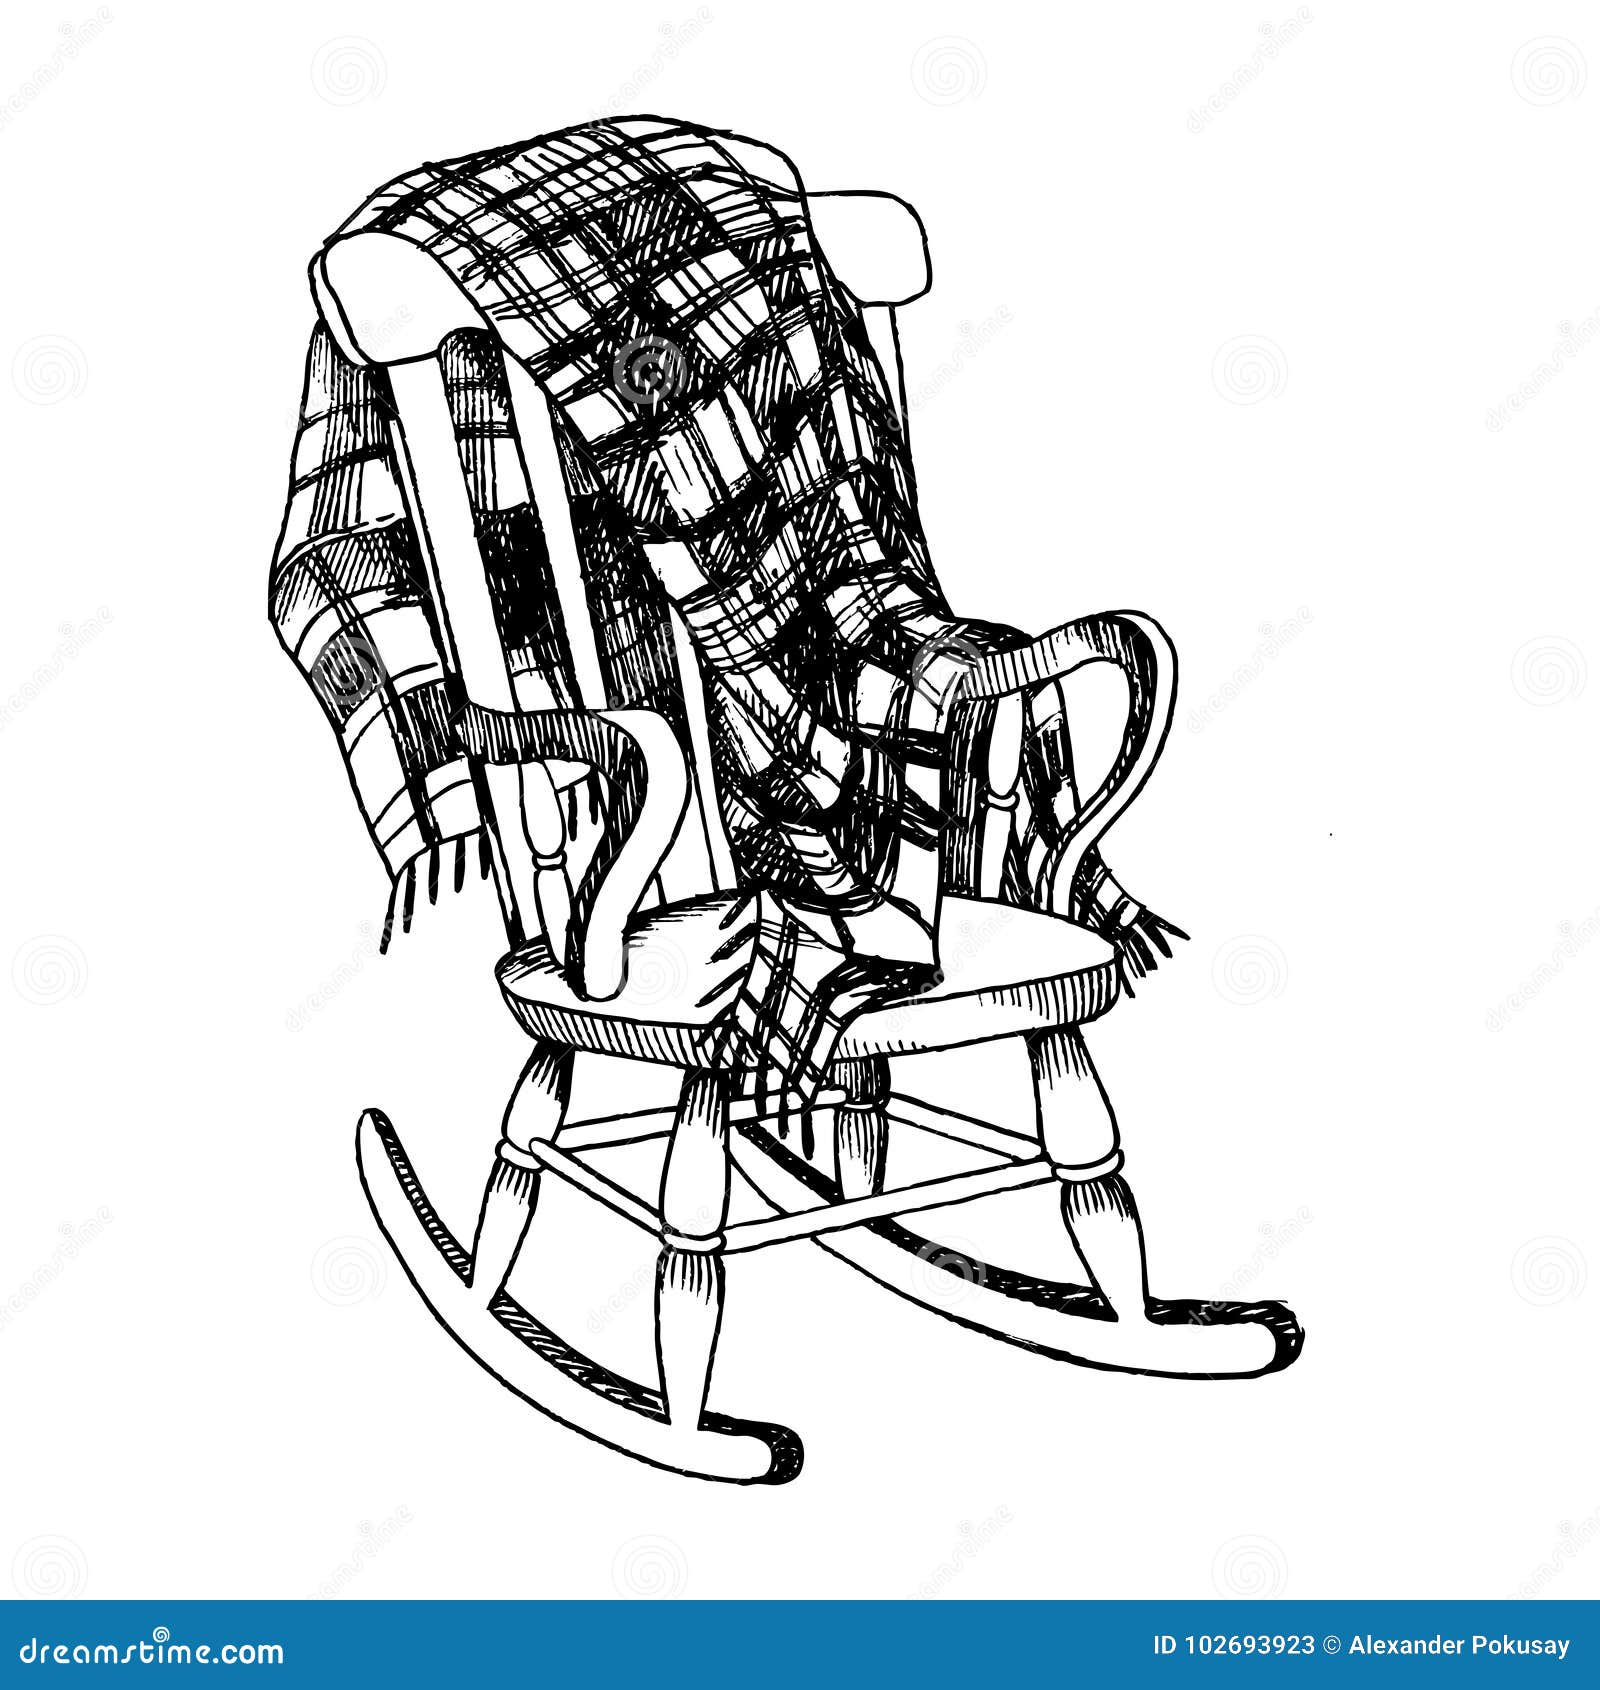 Premium Vector  A black and white drawing of a man sitting in a rocking  chair